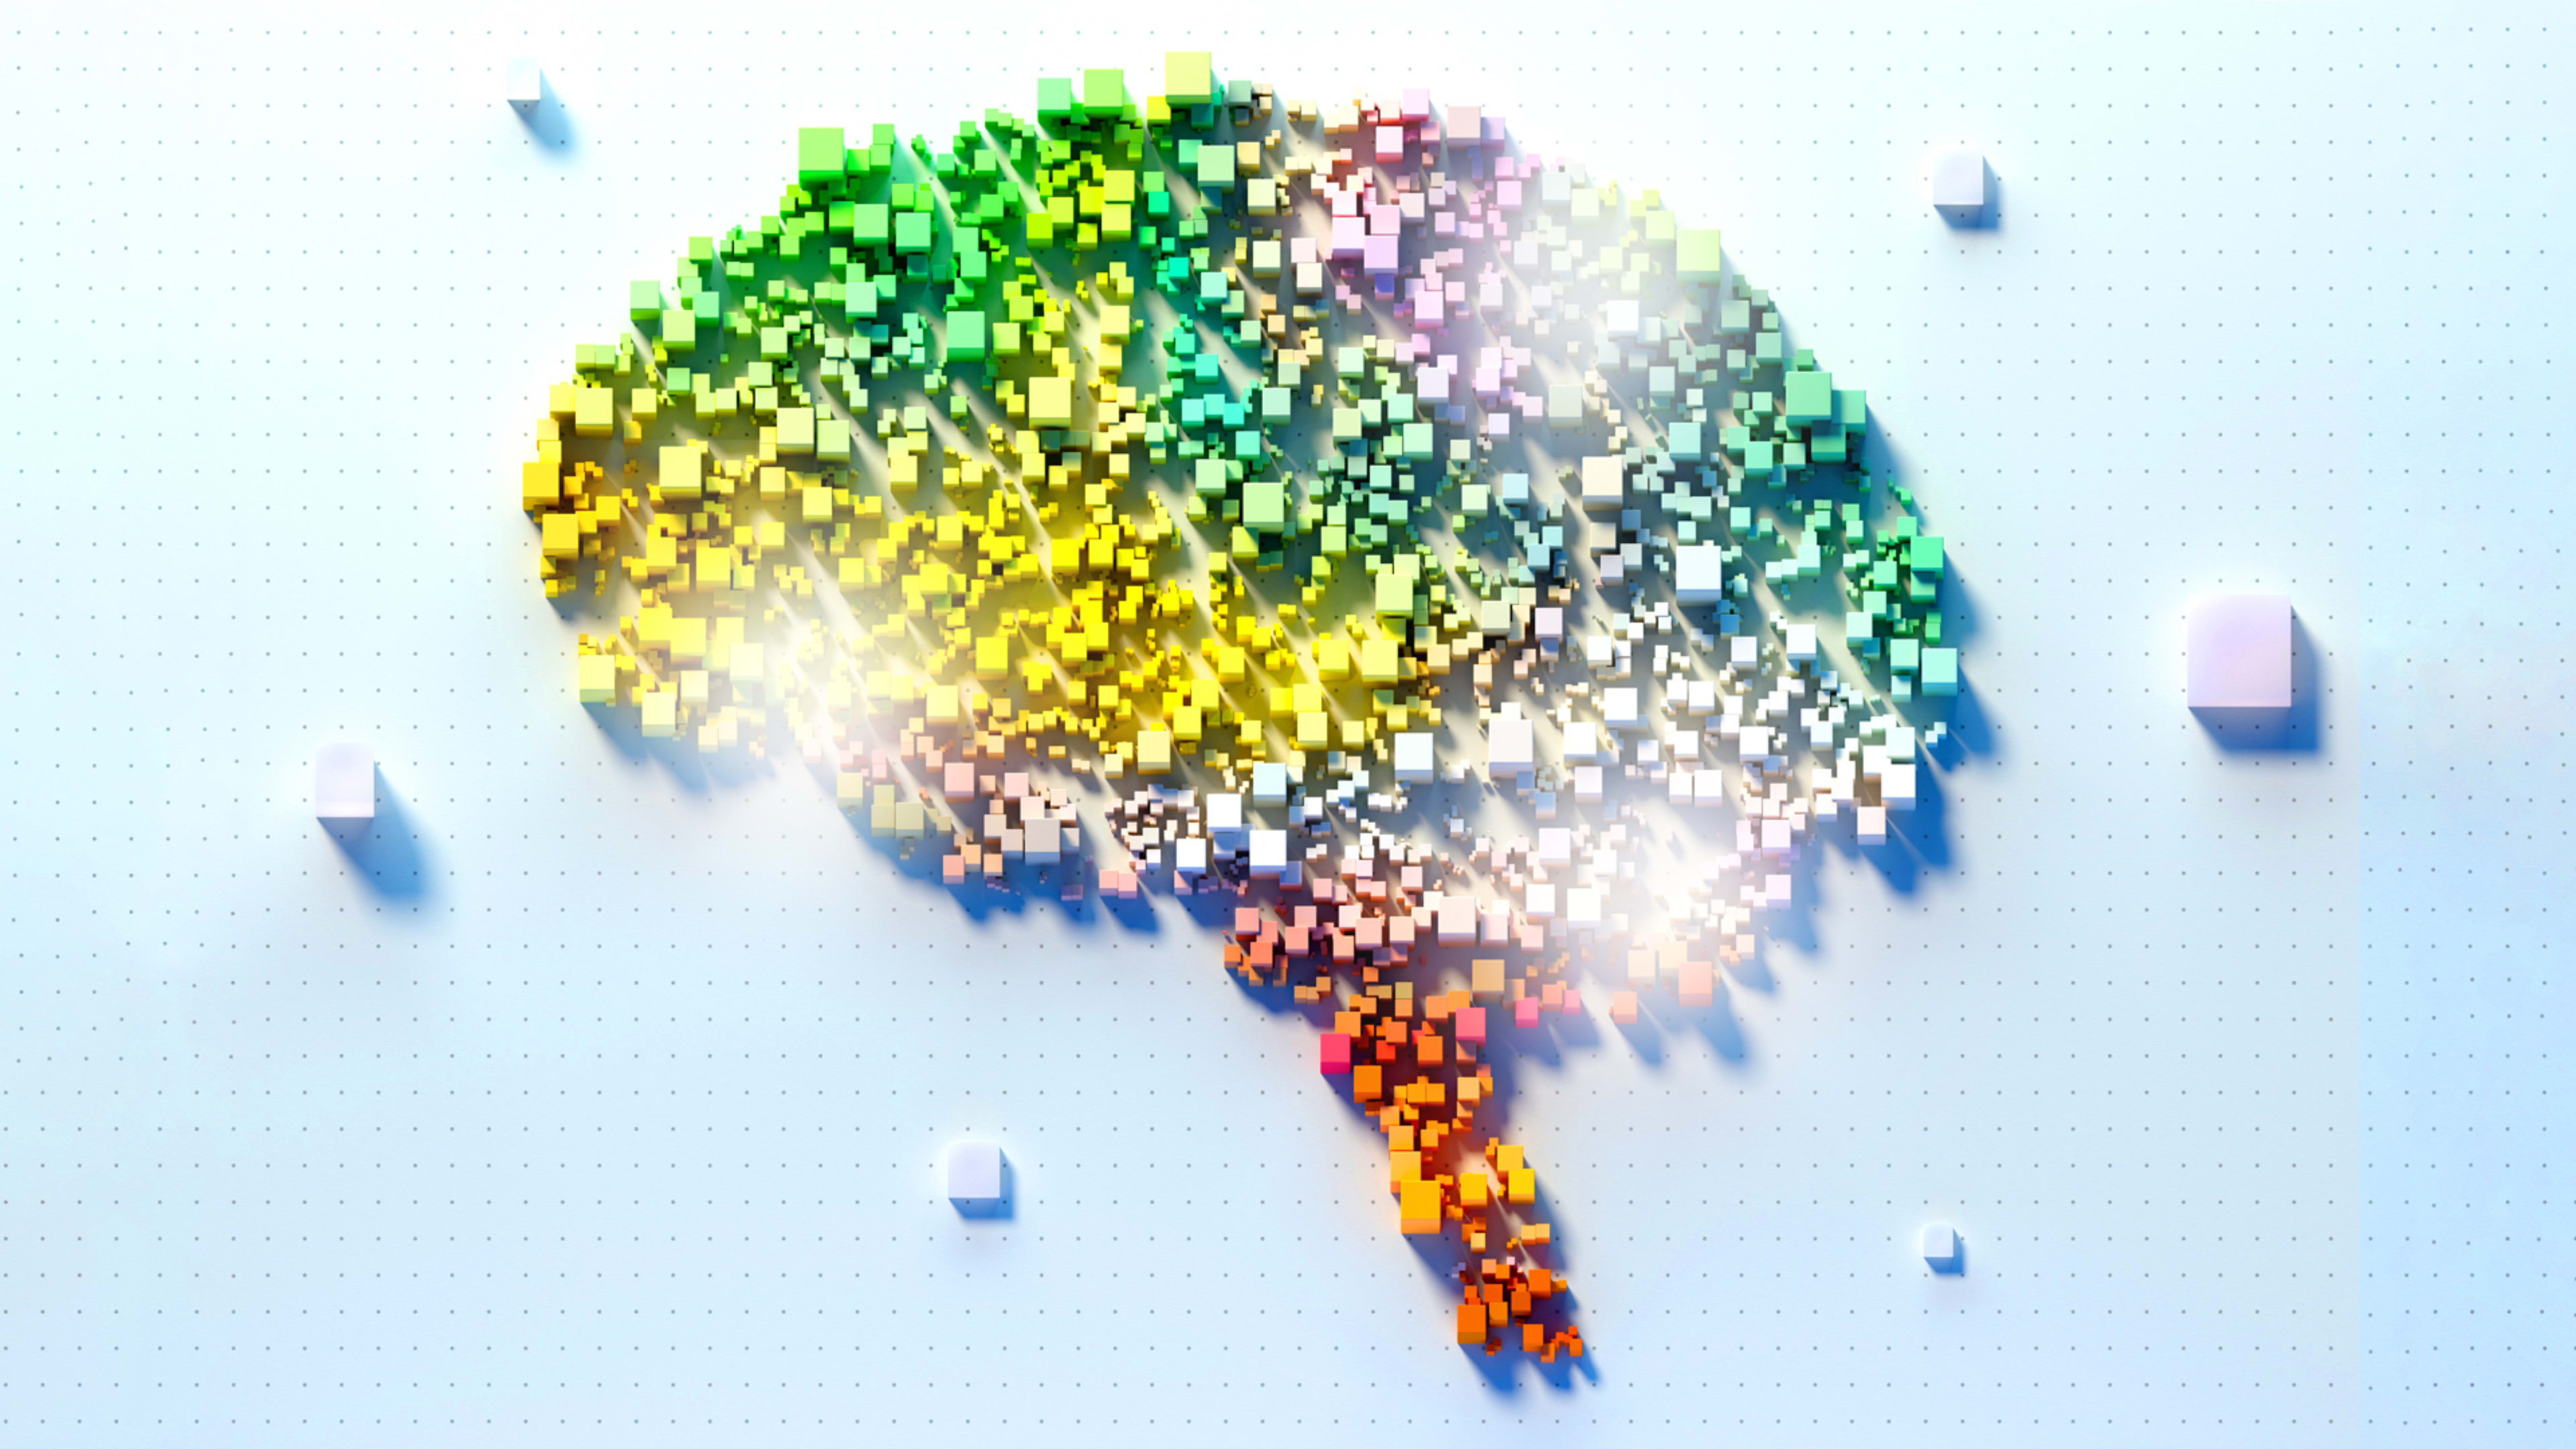 How to tap into brain science to have better ideas